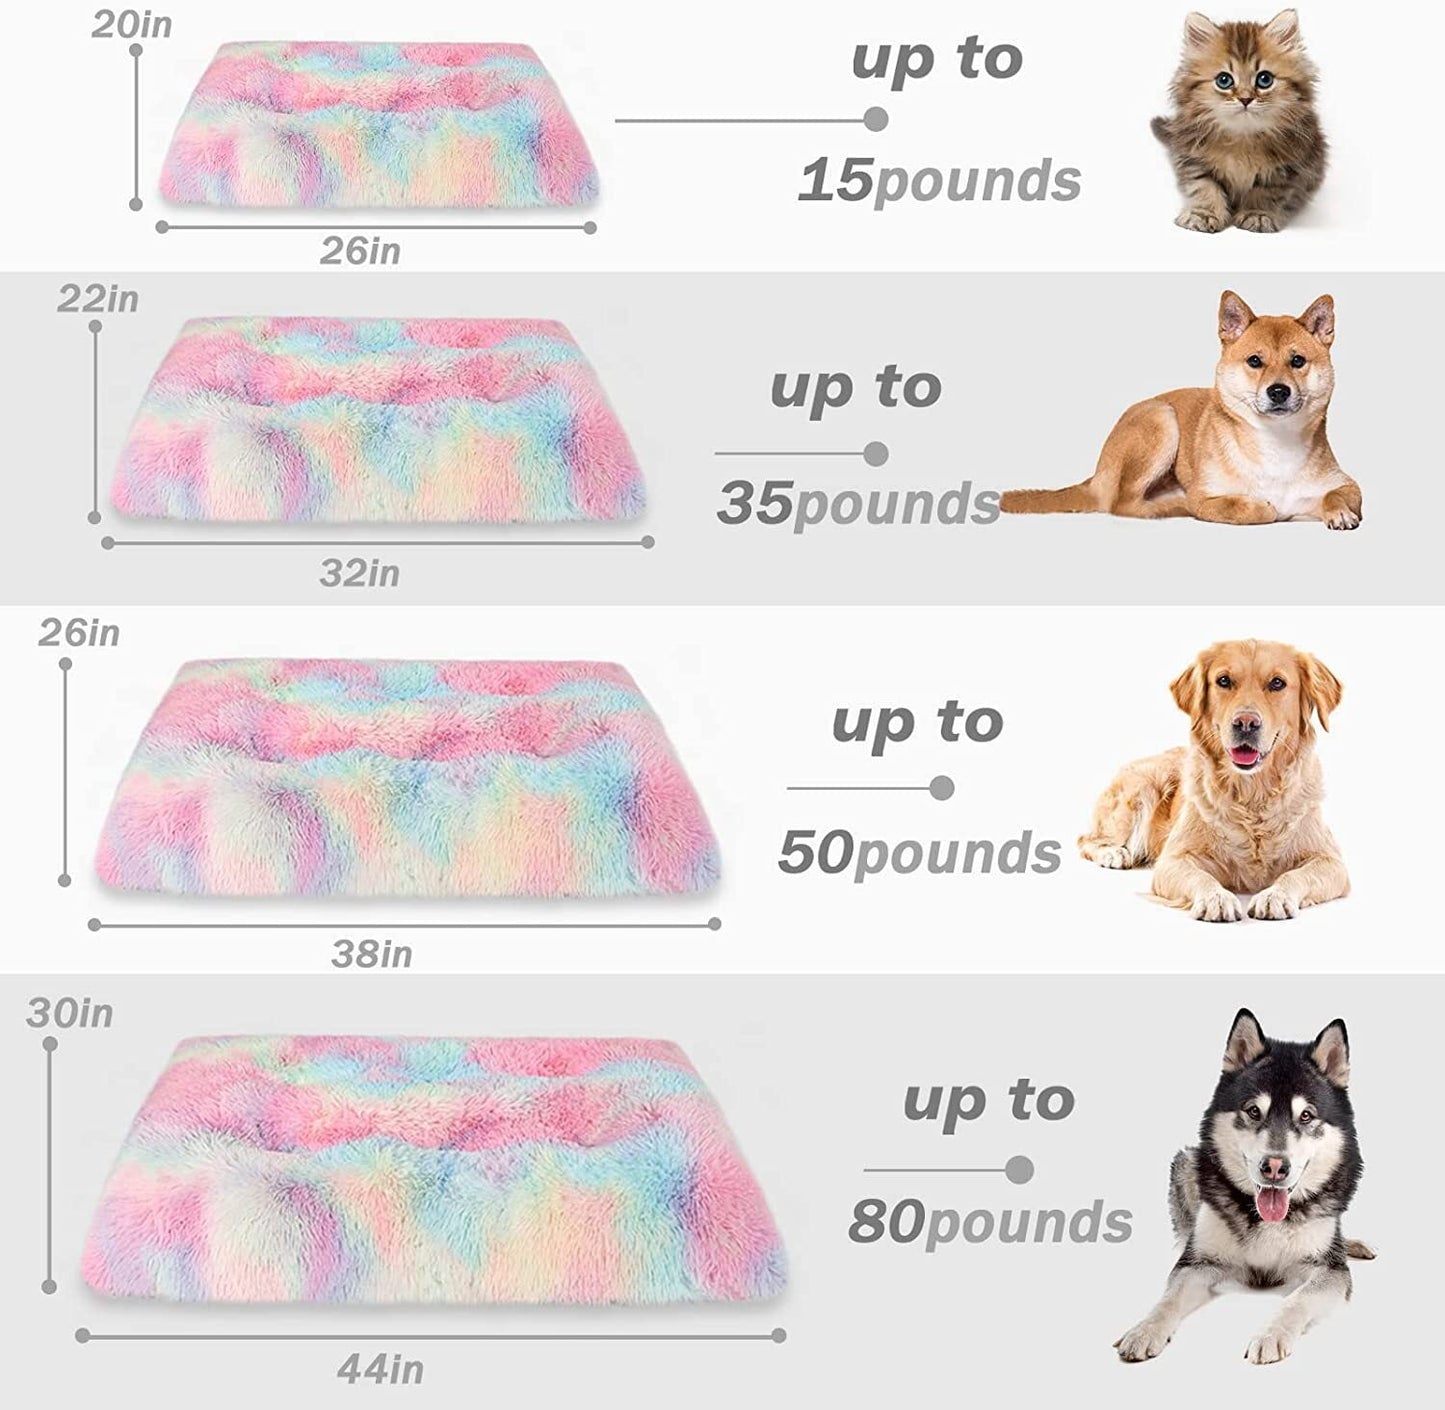 Exclusivo Mecla Soft Plush Dog Bed Crate Mat for Small Dogs (26*20*4 in), Faux Fur Fluffy Dog Pet Cat Kennel Pad with Anti-Slip Bottom, Machine Washable Rainbow